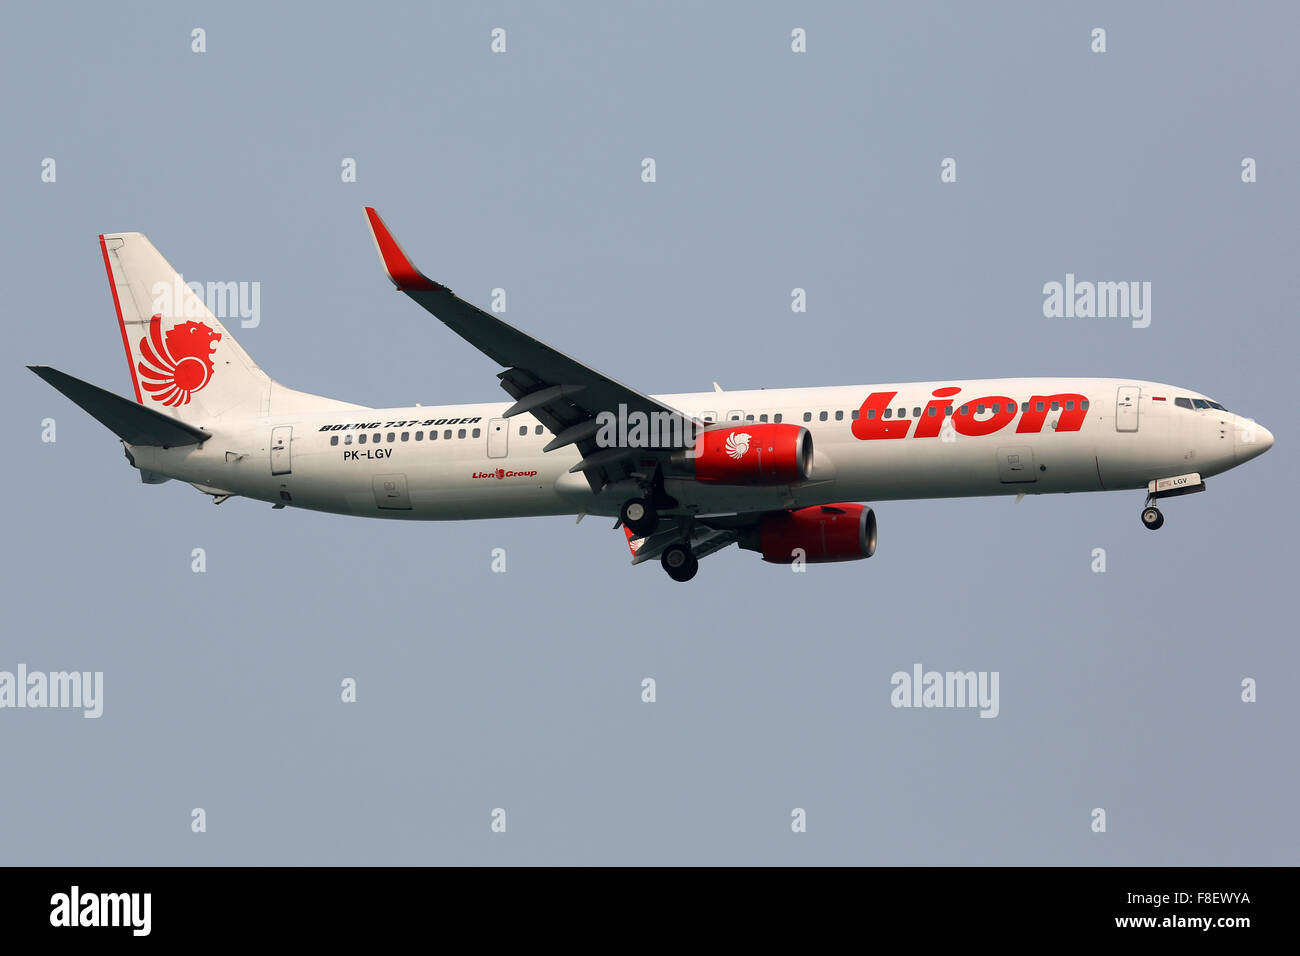 Singapore - October 21, 2015: A Lion Air Boeing 737-900ER with the registration PK-LGV approaches Singapore Airport (SIN). Lion Stock Photo